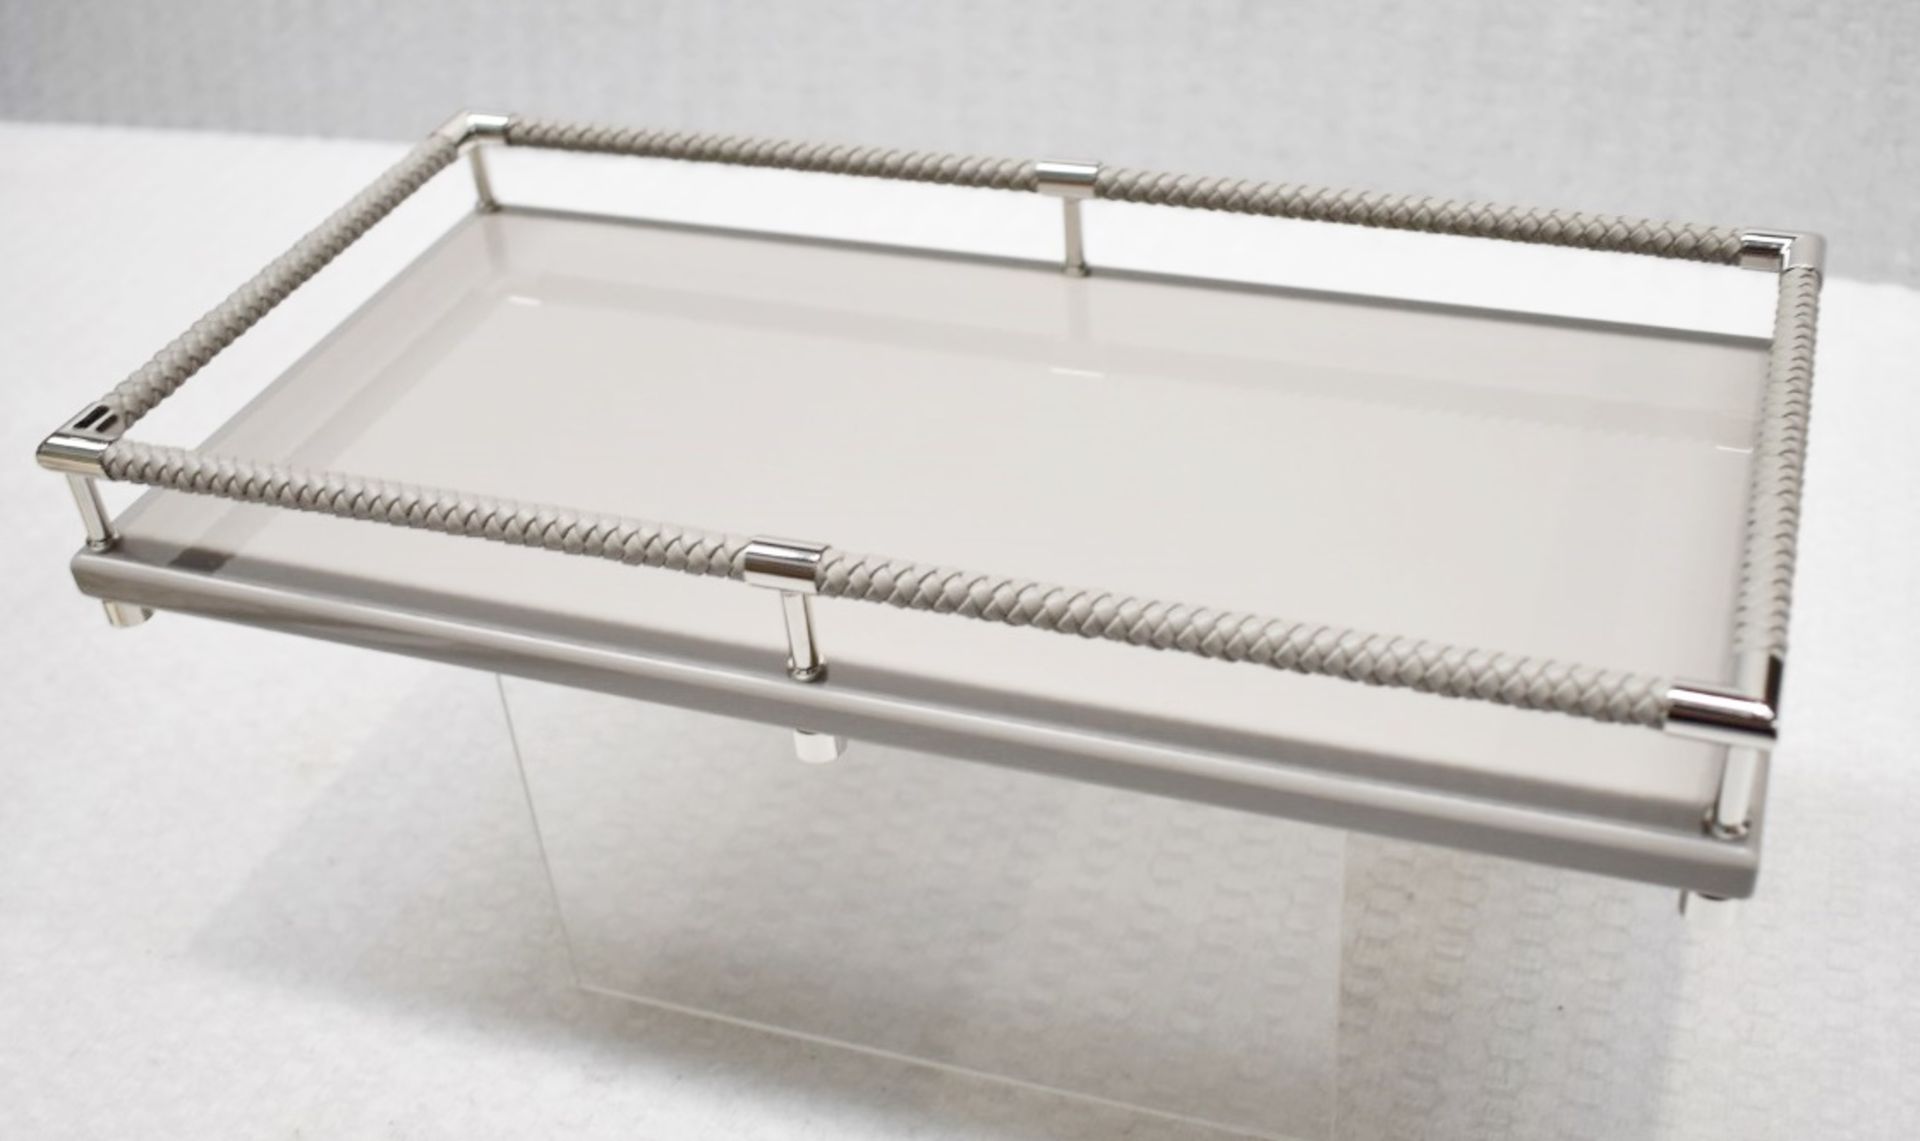 1 x RIVIERE Luxury Leather-Trim Lacquered Tray in Grey - Original Price £419.00 - Unused Boxed Stock - Image 8 of 9